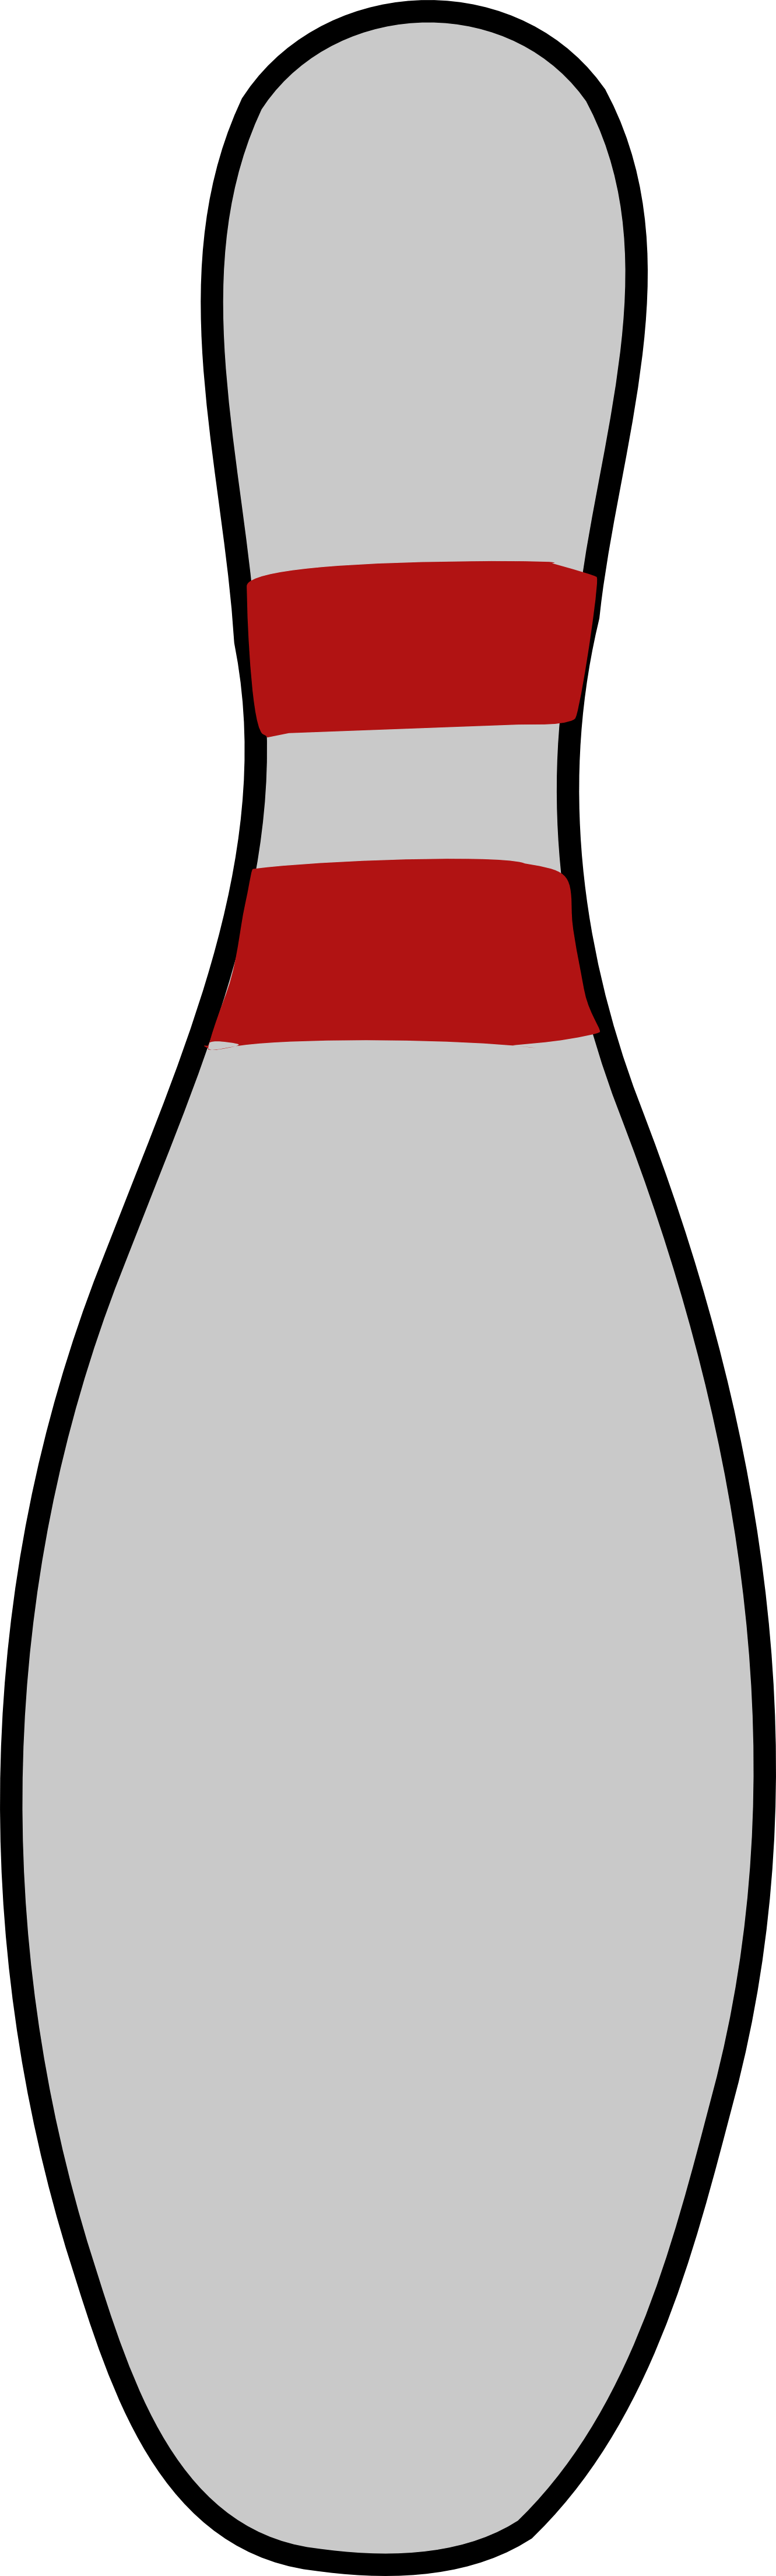 bowling pin drawing easy - Clip Art Library